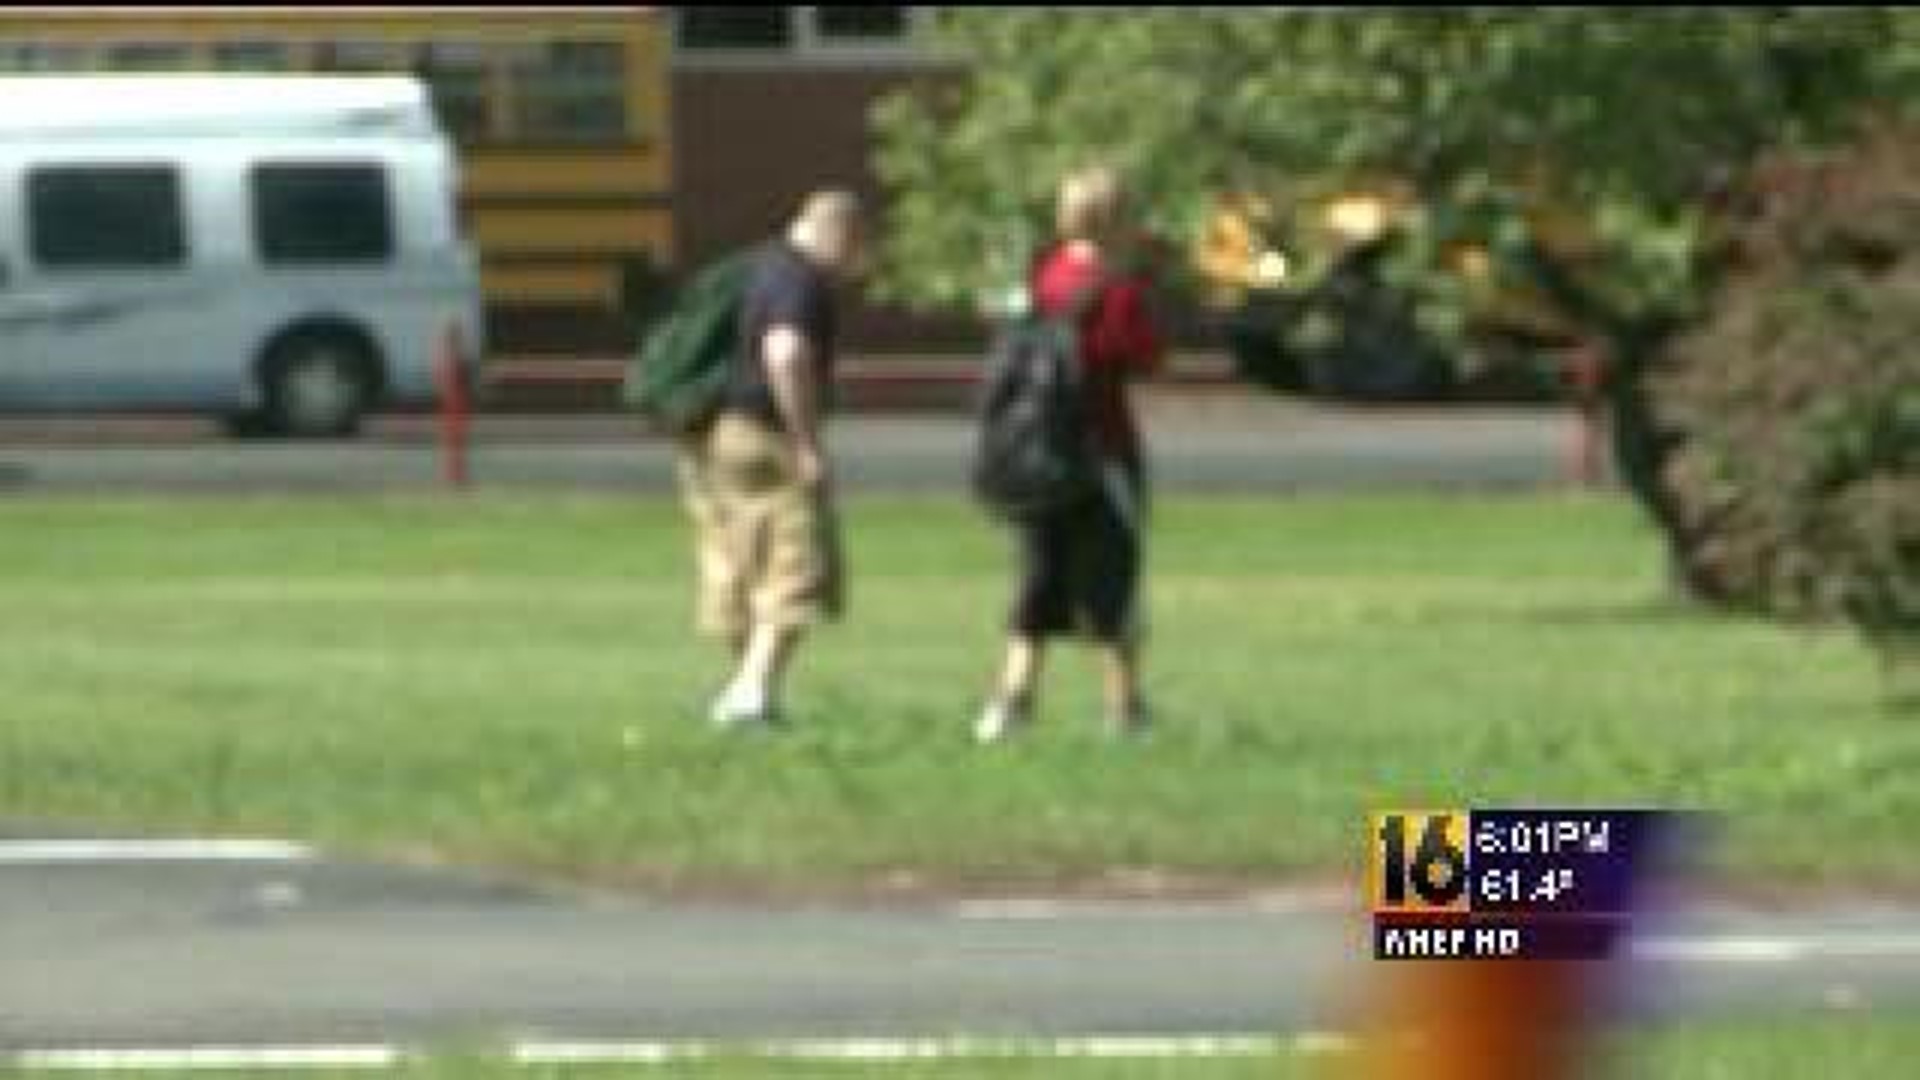 Man Tries to Lure Teen After School